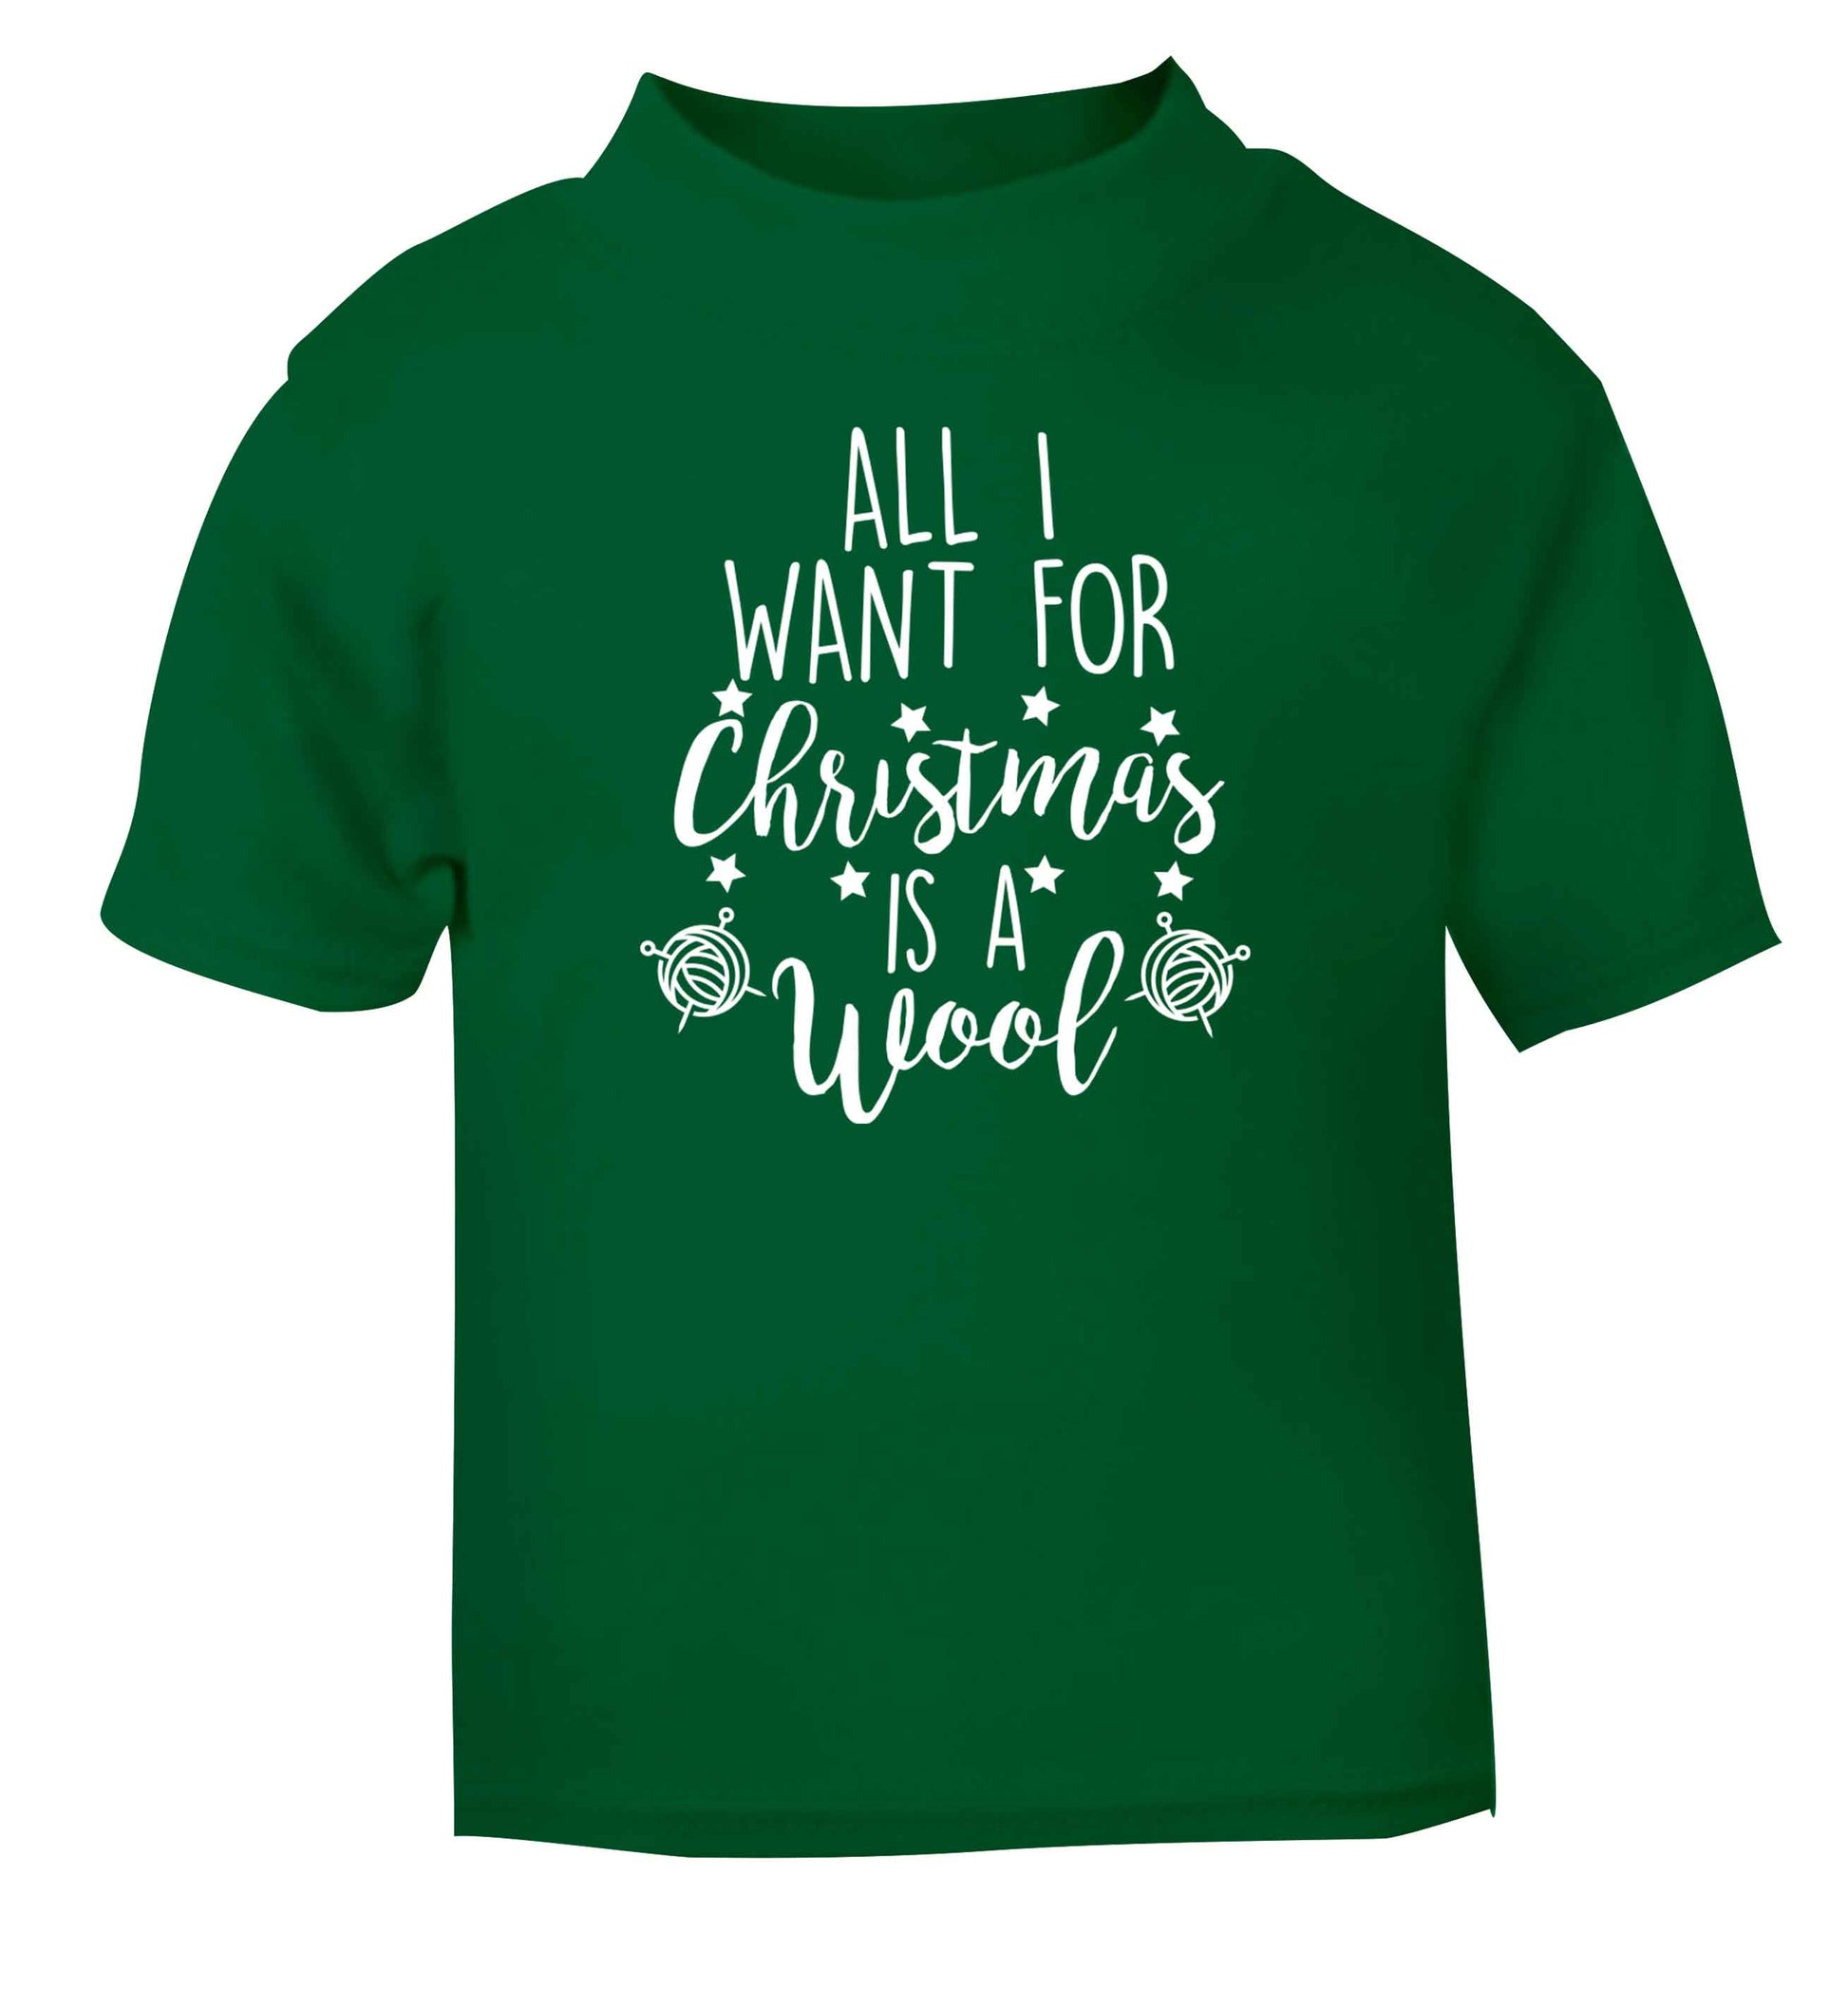 All I want for Christmas is wool! green Baby Toddler Tshirt 2 Years